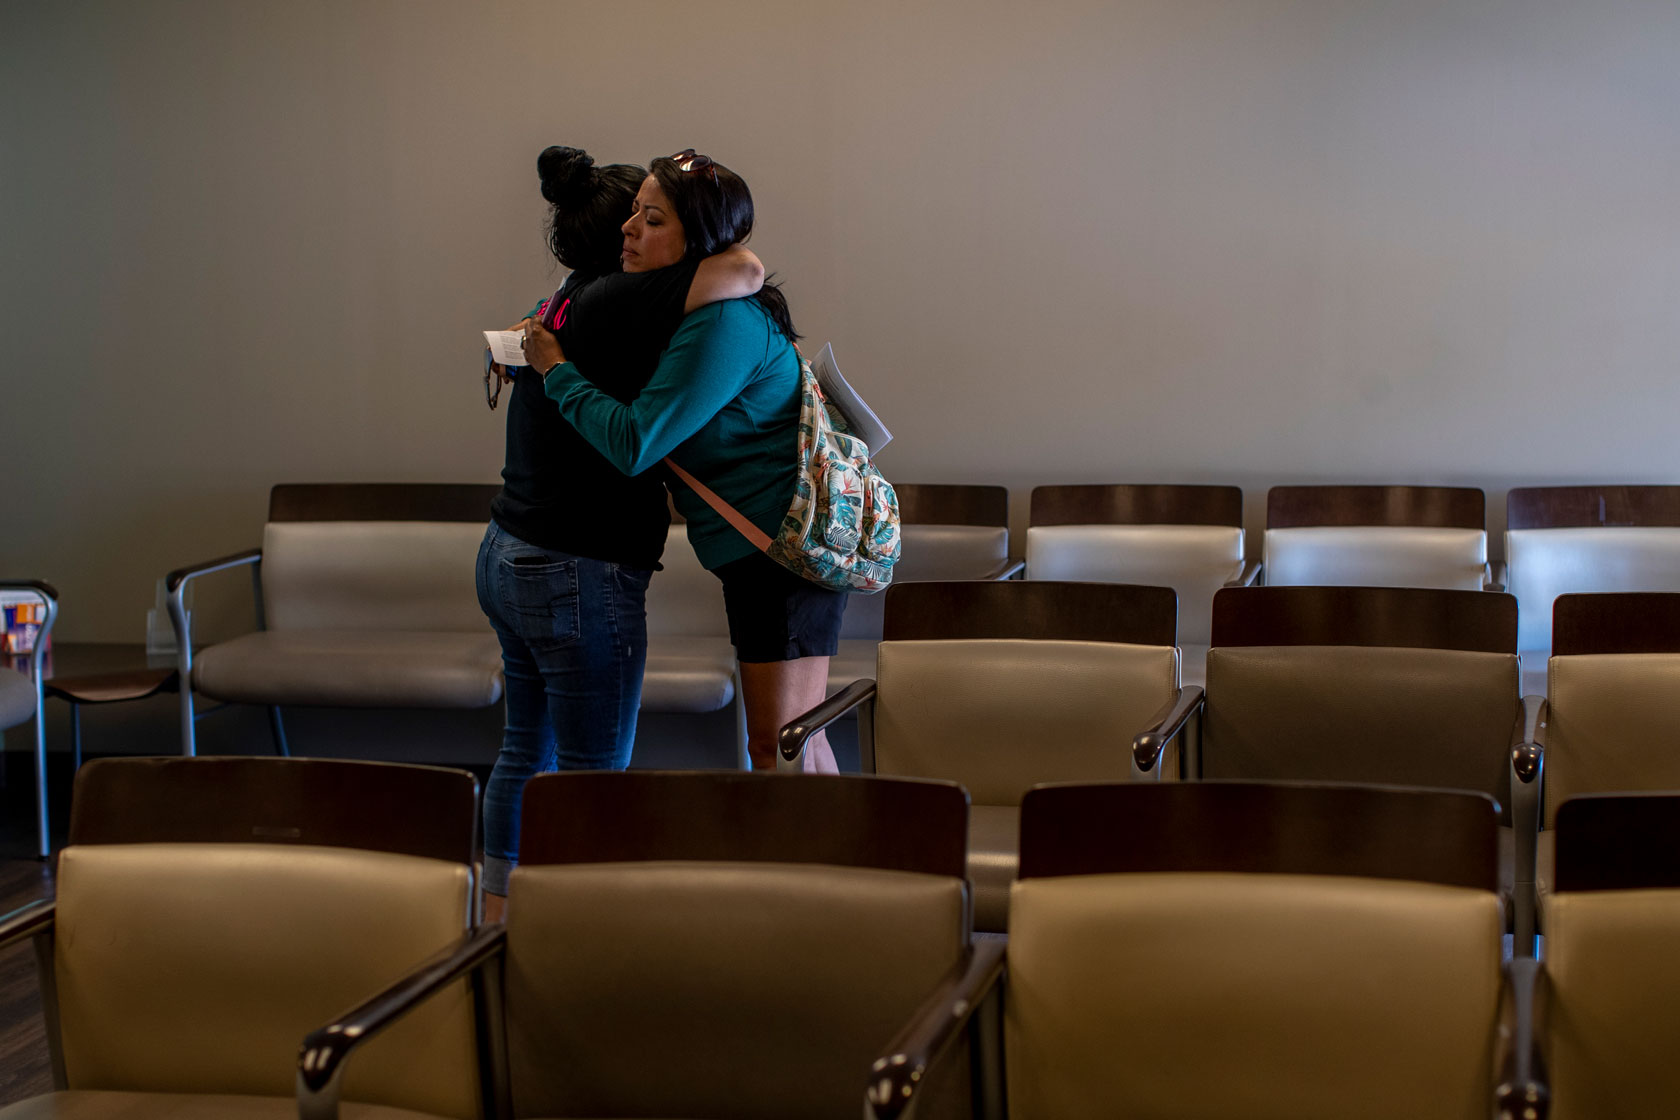 Photo shows two women hugging in a waiting room.